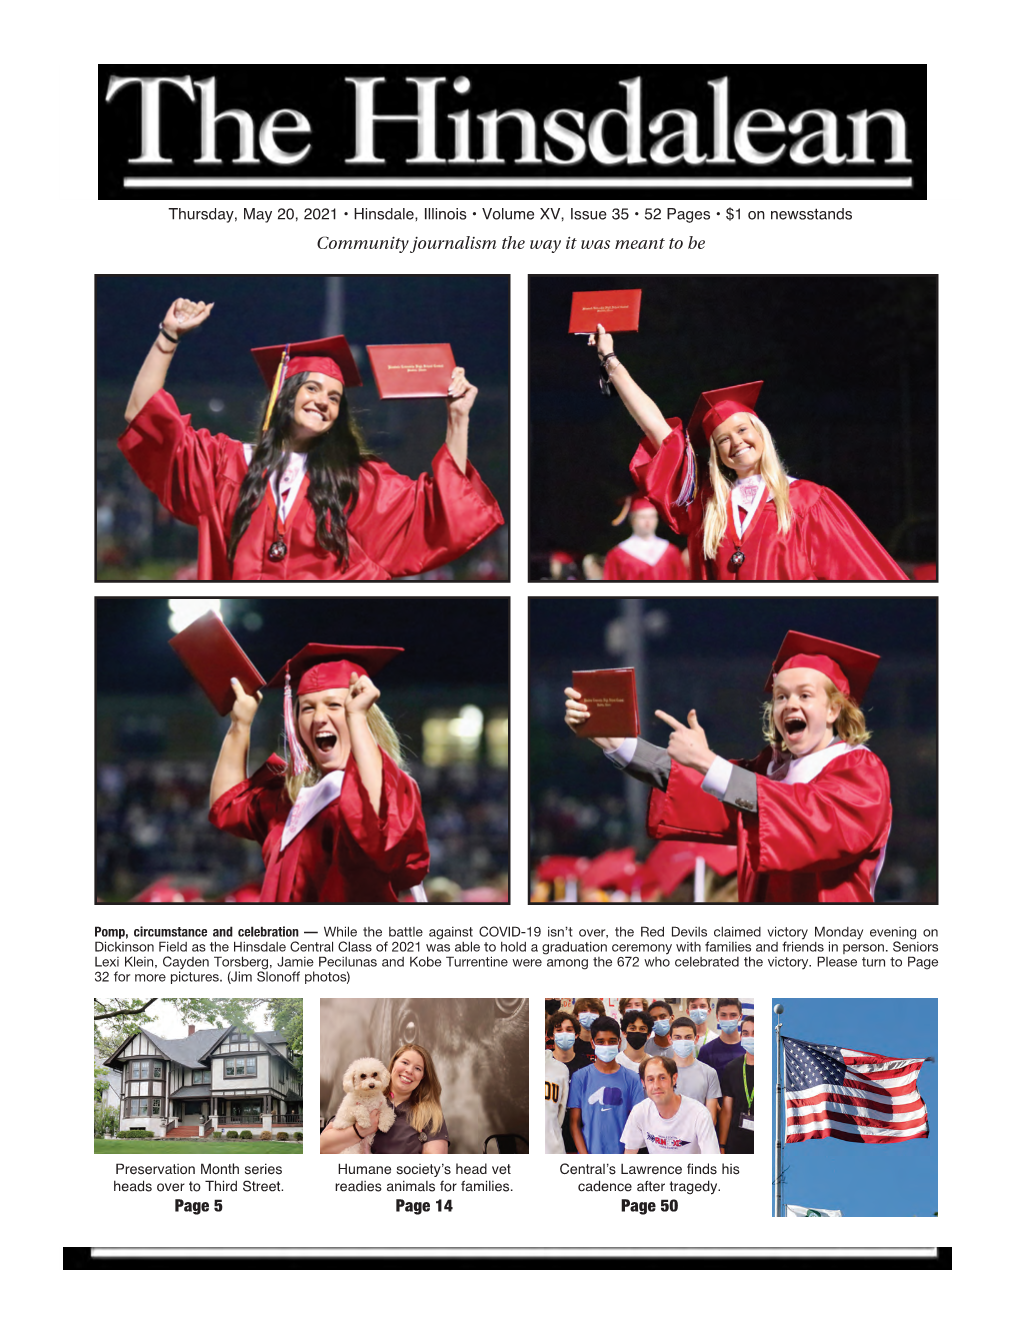 May 20, 2021 • Hinsdale, Illinois • Volume XV, Issue 35 • 52 Pages • $1 on Newsstands Community Journalism the Way It Was Meant to Be